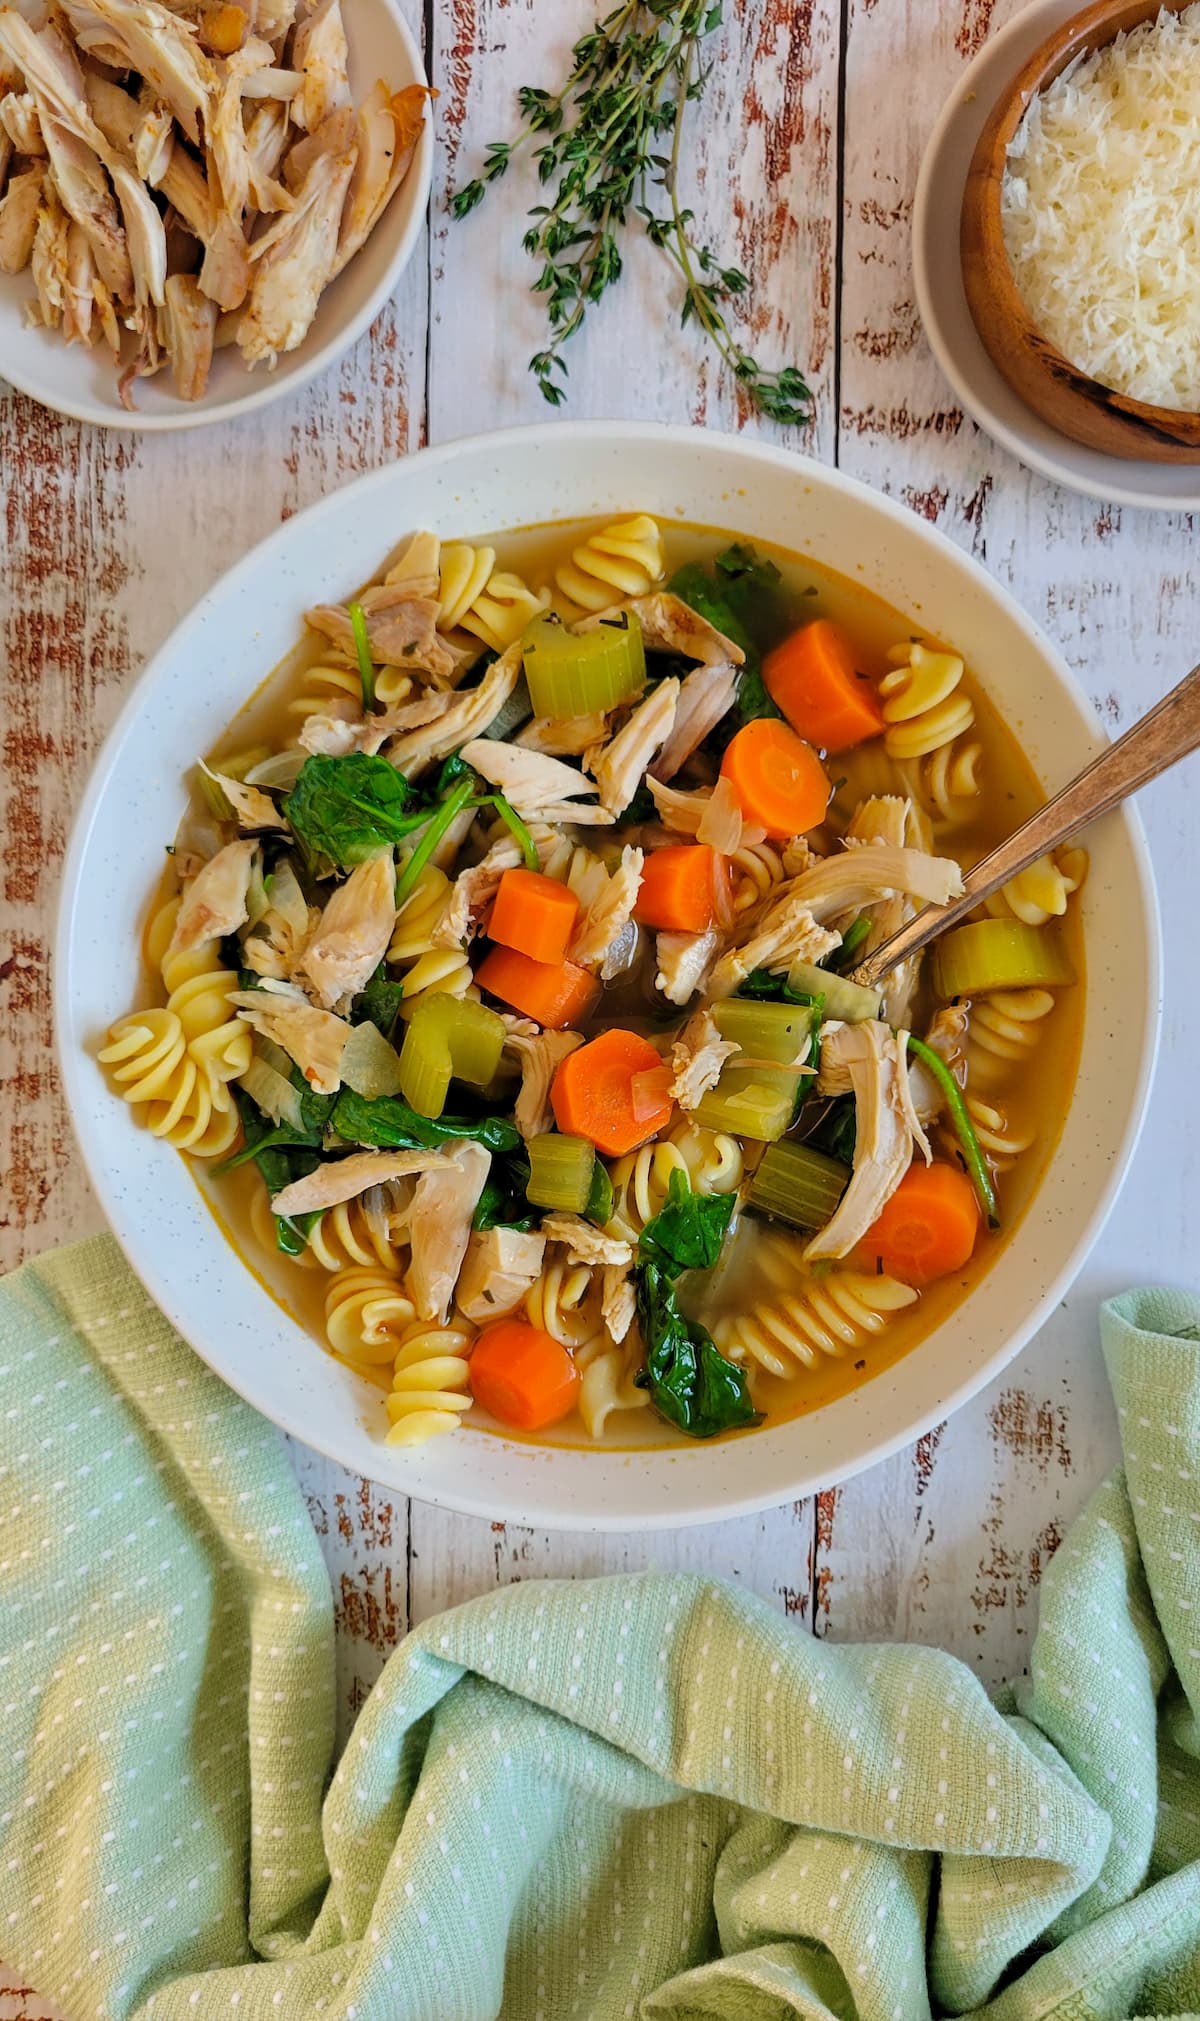 bowl of soup with turkey, vegetables and pasta, spoon in the bowl, plate of shredded turkey and parmesan in the background